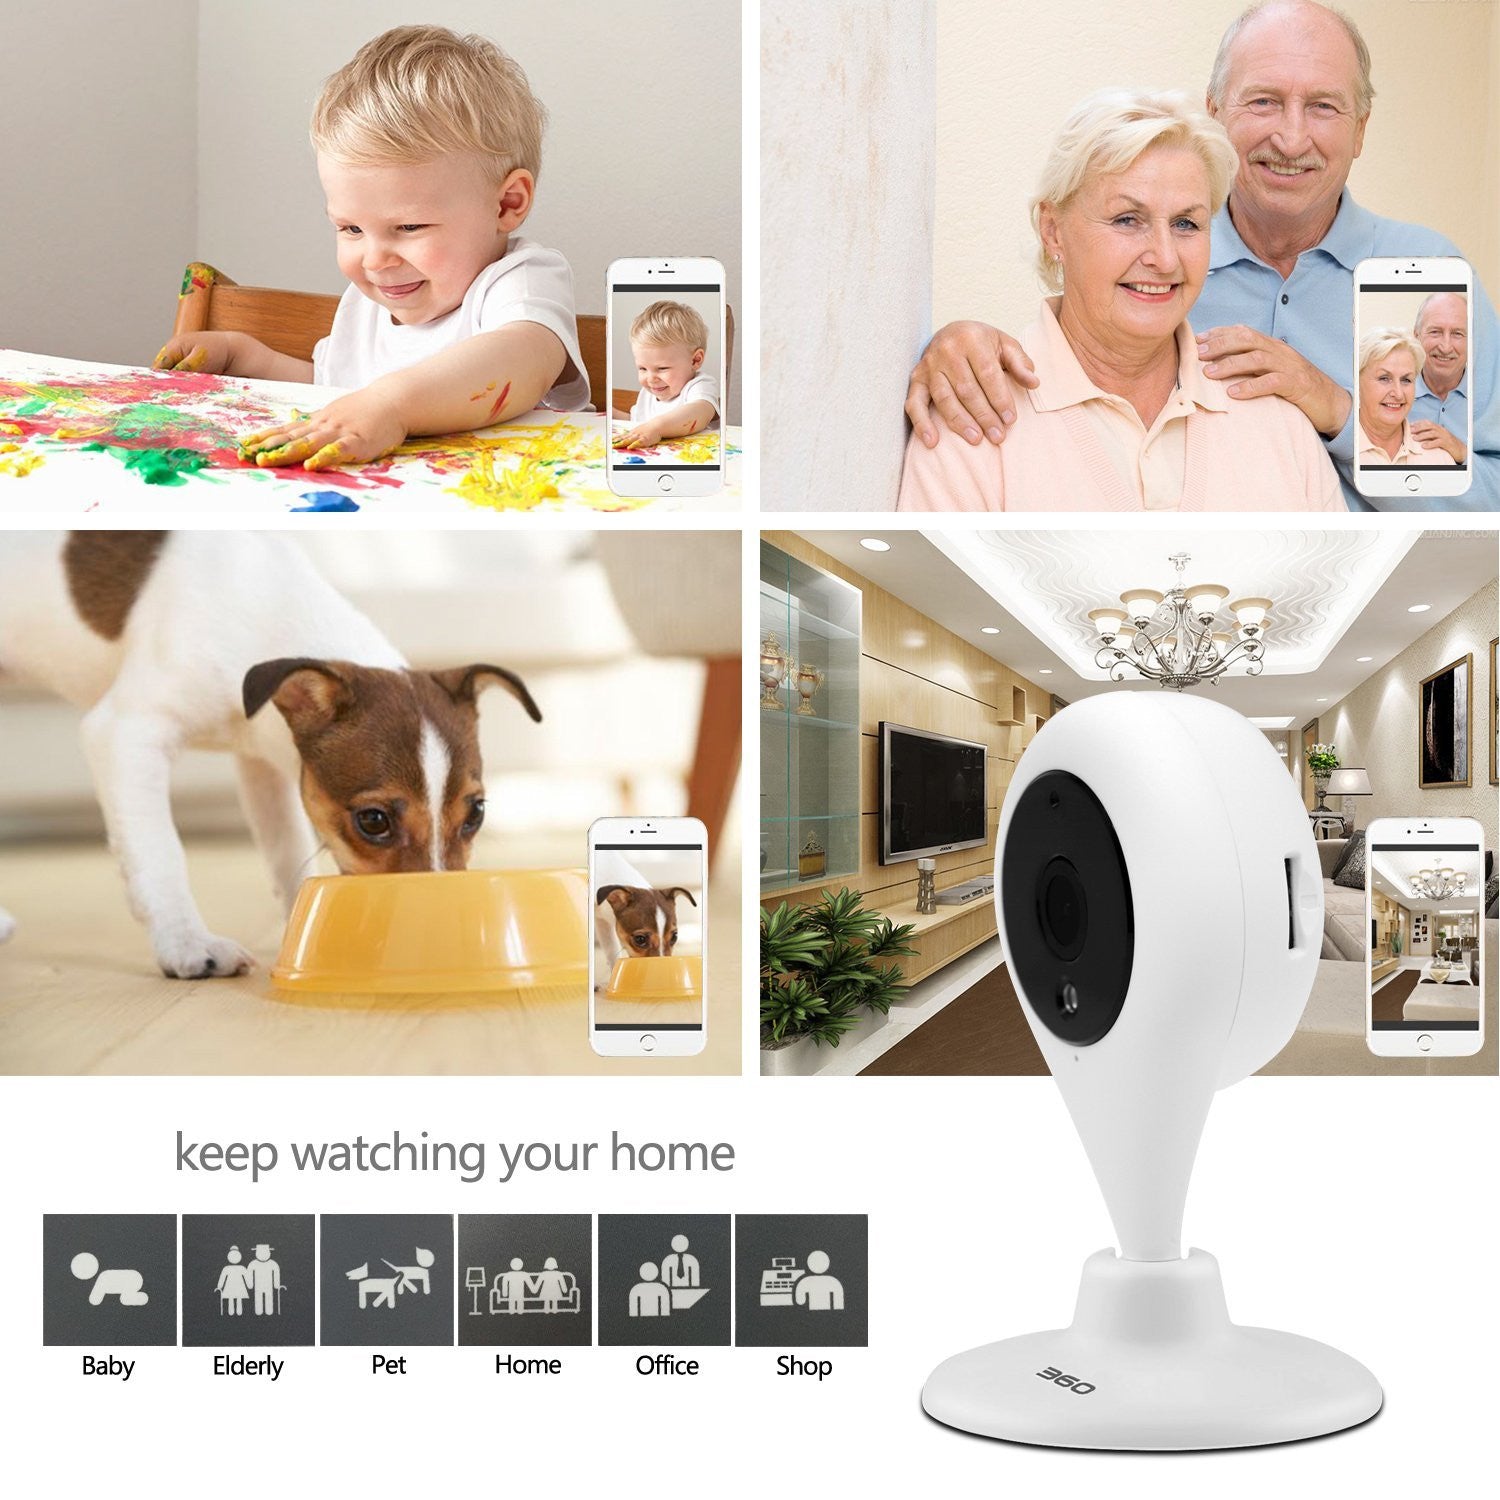 360 Home Camera Wireless IP Security Surveillance System Support Upto 32GB MicroSD